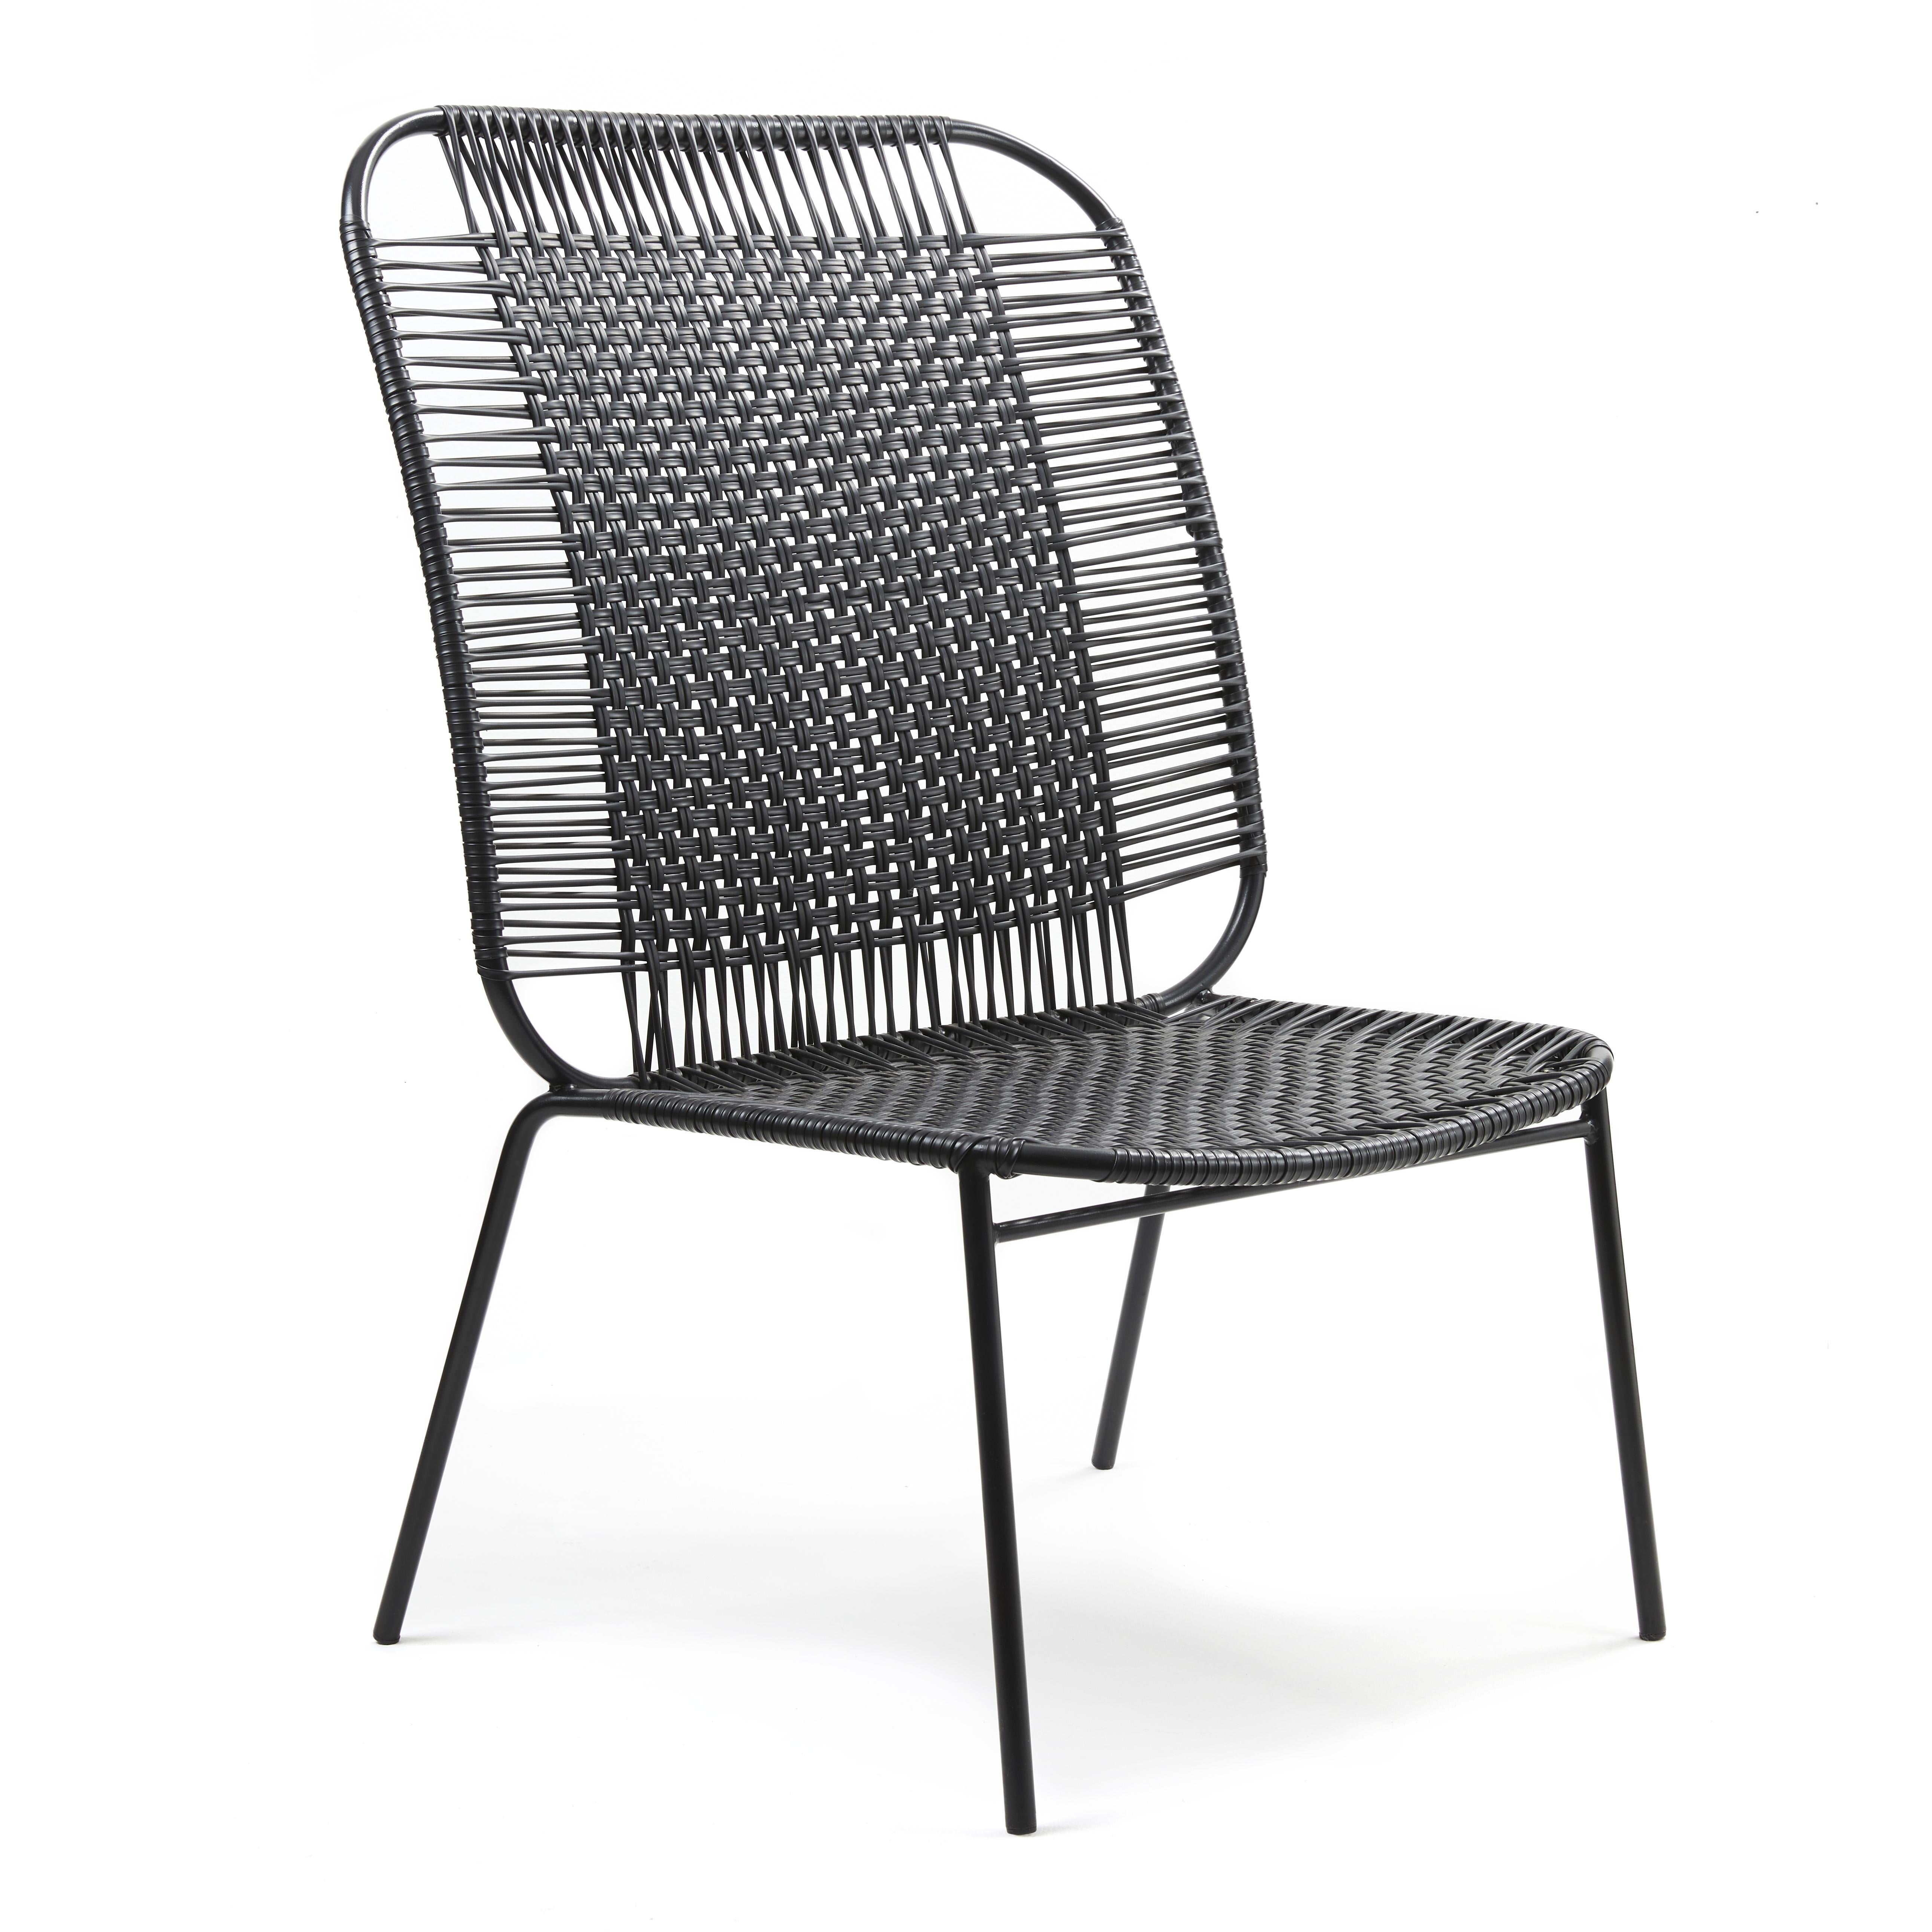 Set of 4 Black Cielo lounge high chair by Sebastian Herkner
Materials: Galvanized and powder-coated tubular steel. PVC strings are made from recycled plastic.
Technique: Made from recycled plastic and weaved by local craftspeople in Cartagena,